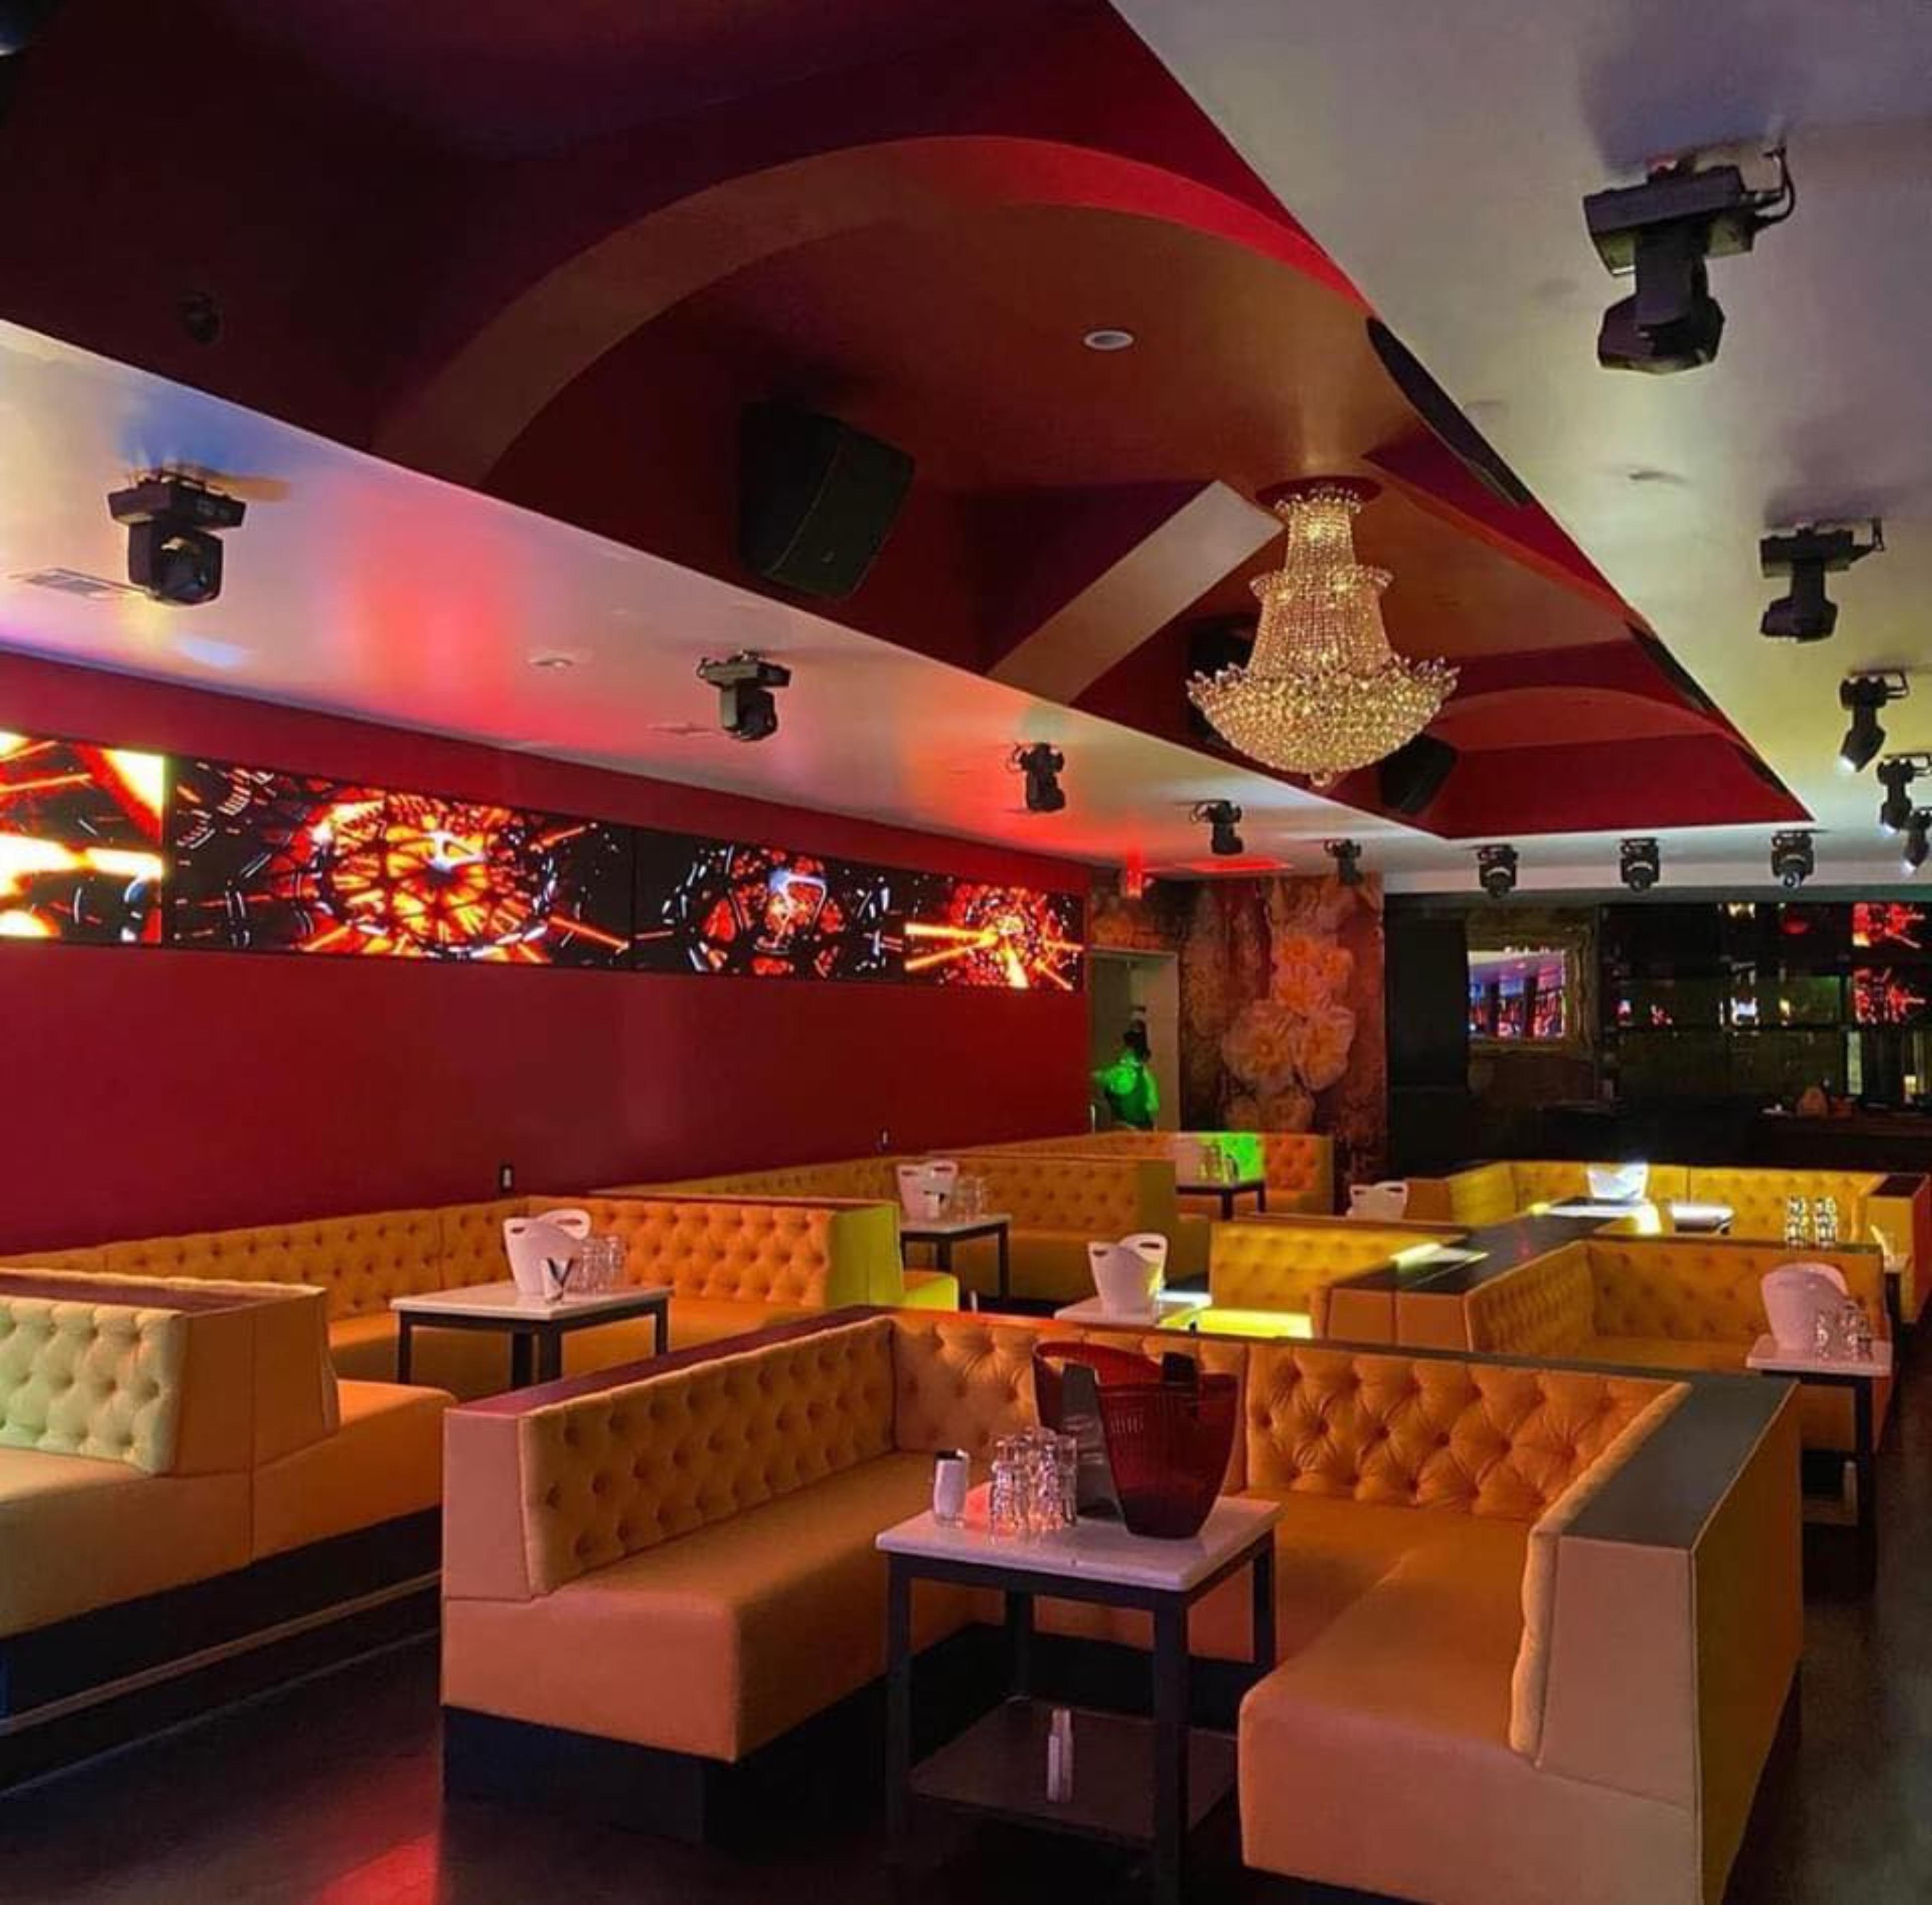 Red Martini Restaurant and Lounge